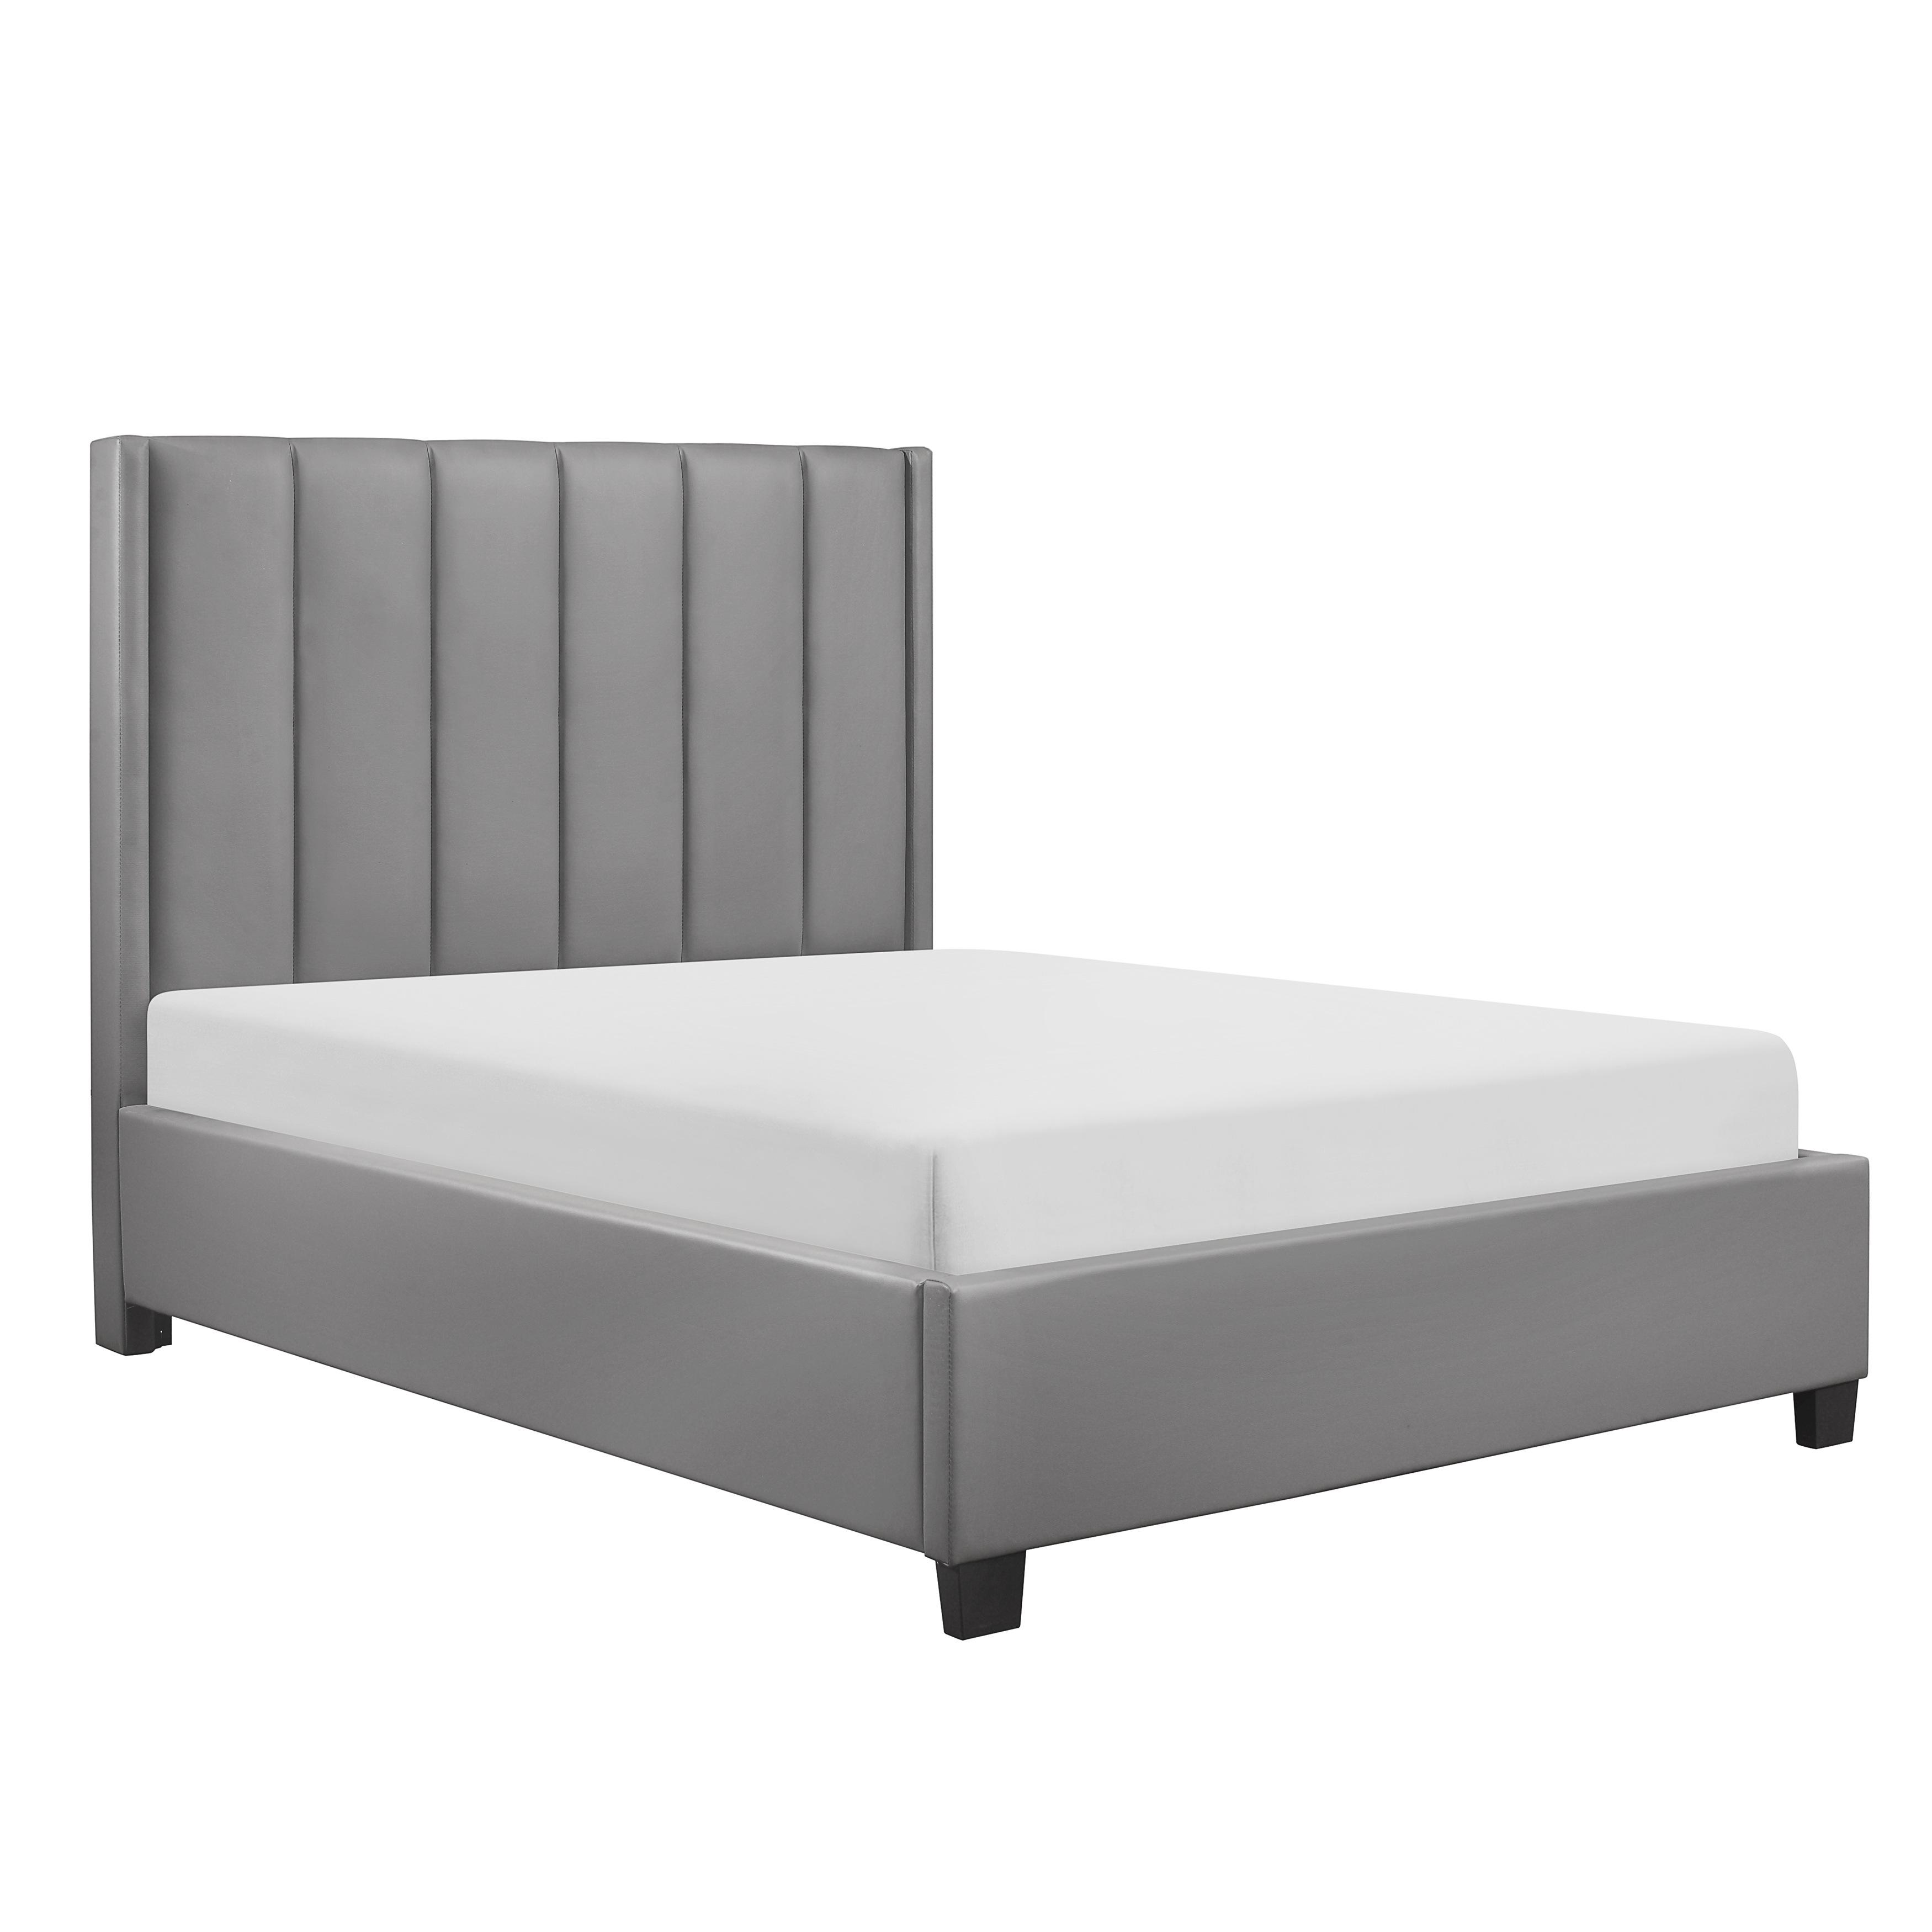 Modern Platform Bed 1570GY-1* Anson 1570GY-1* in Gray Faux Leather